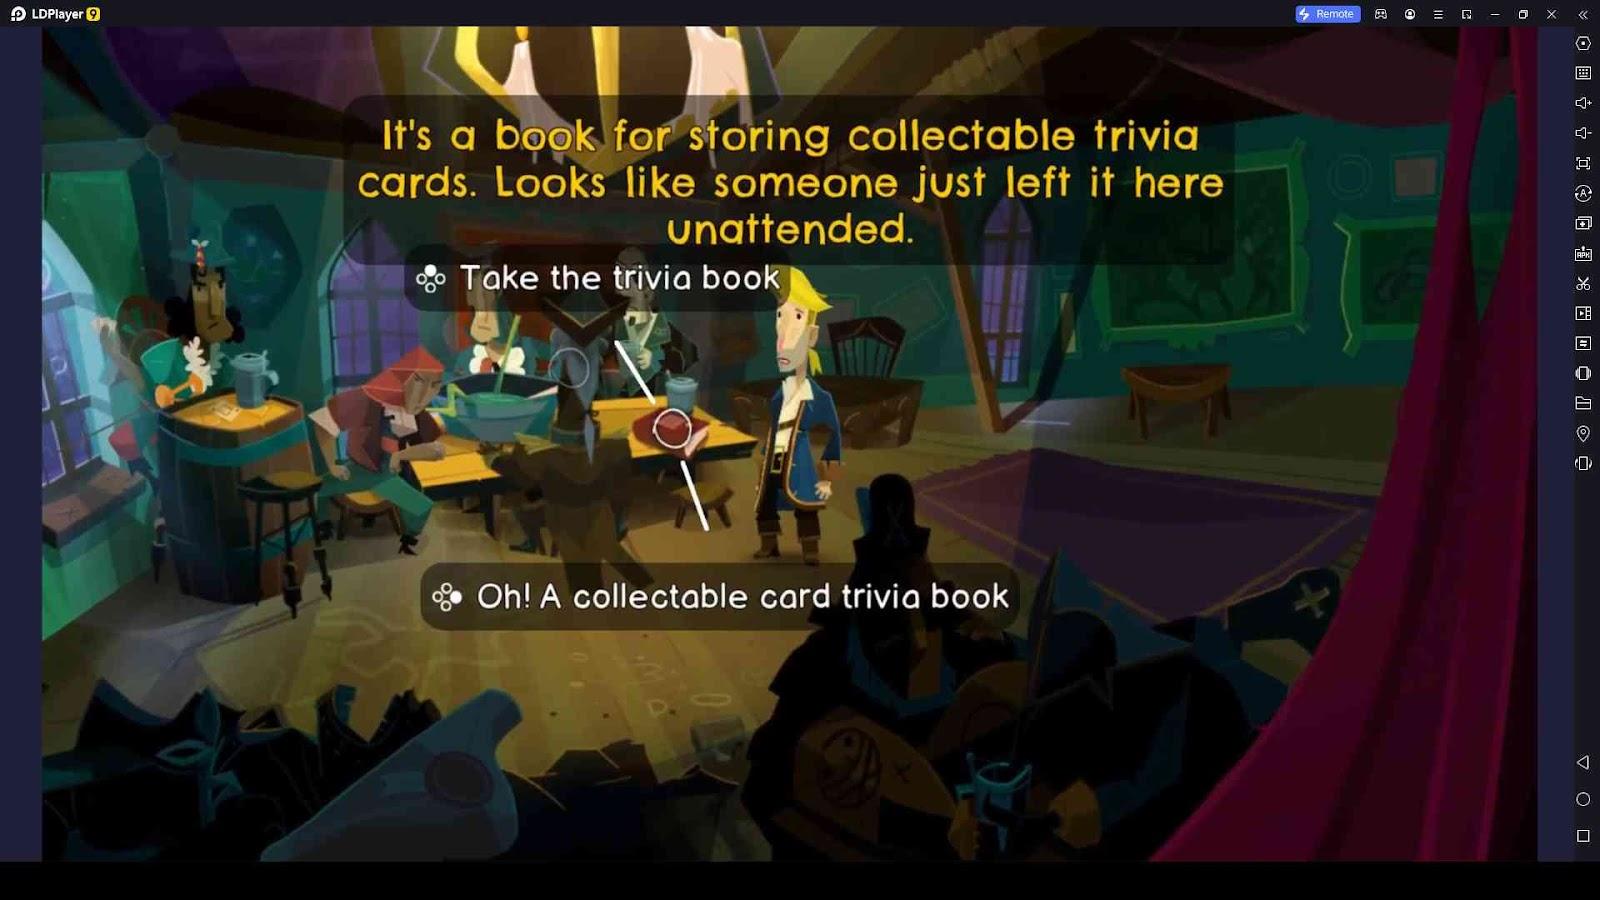 Where Do We Find More Trivia Cards